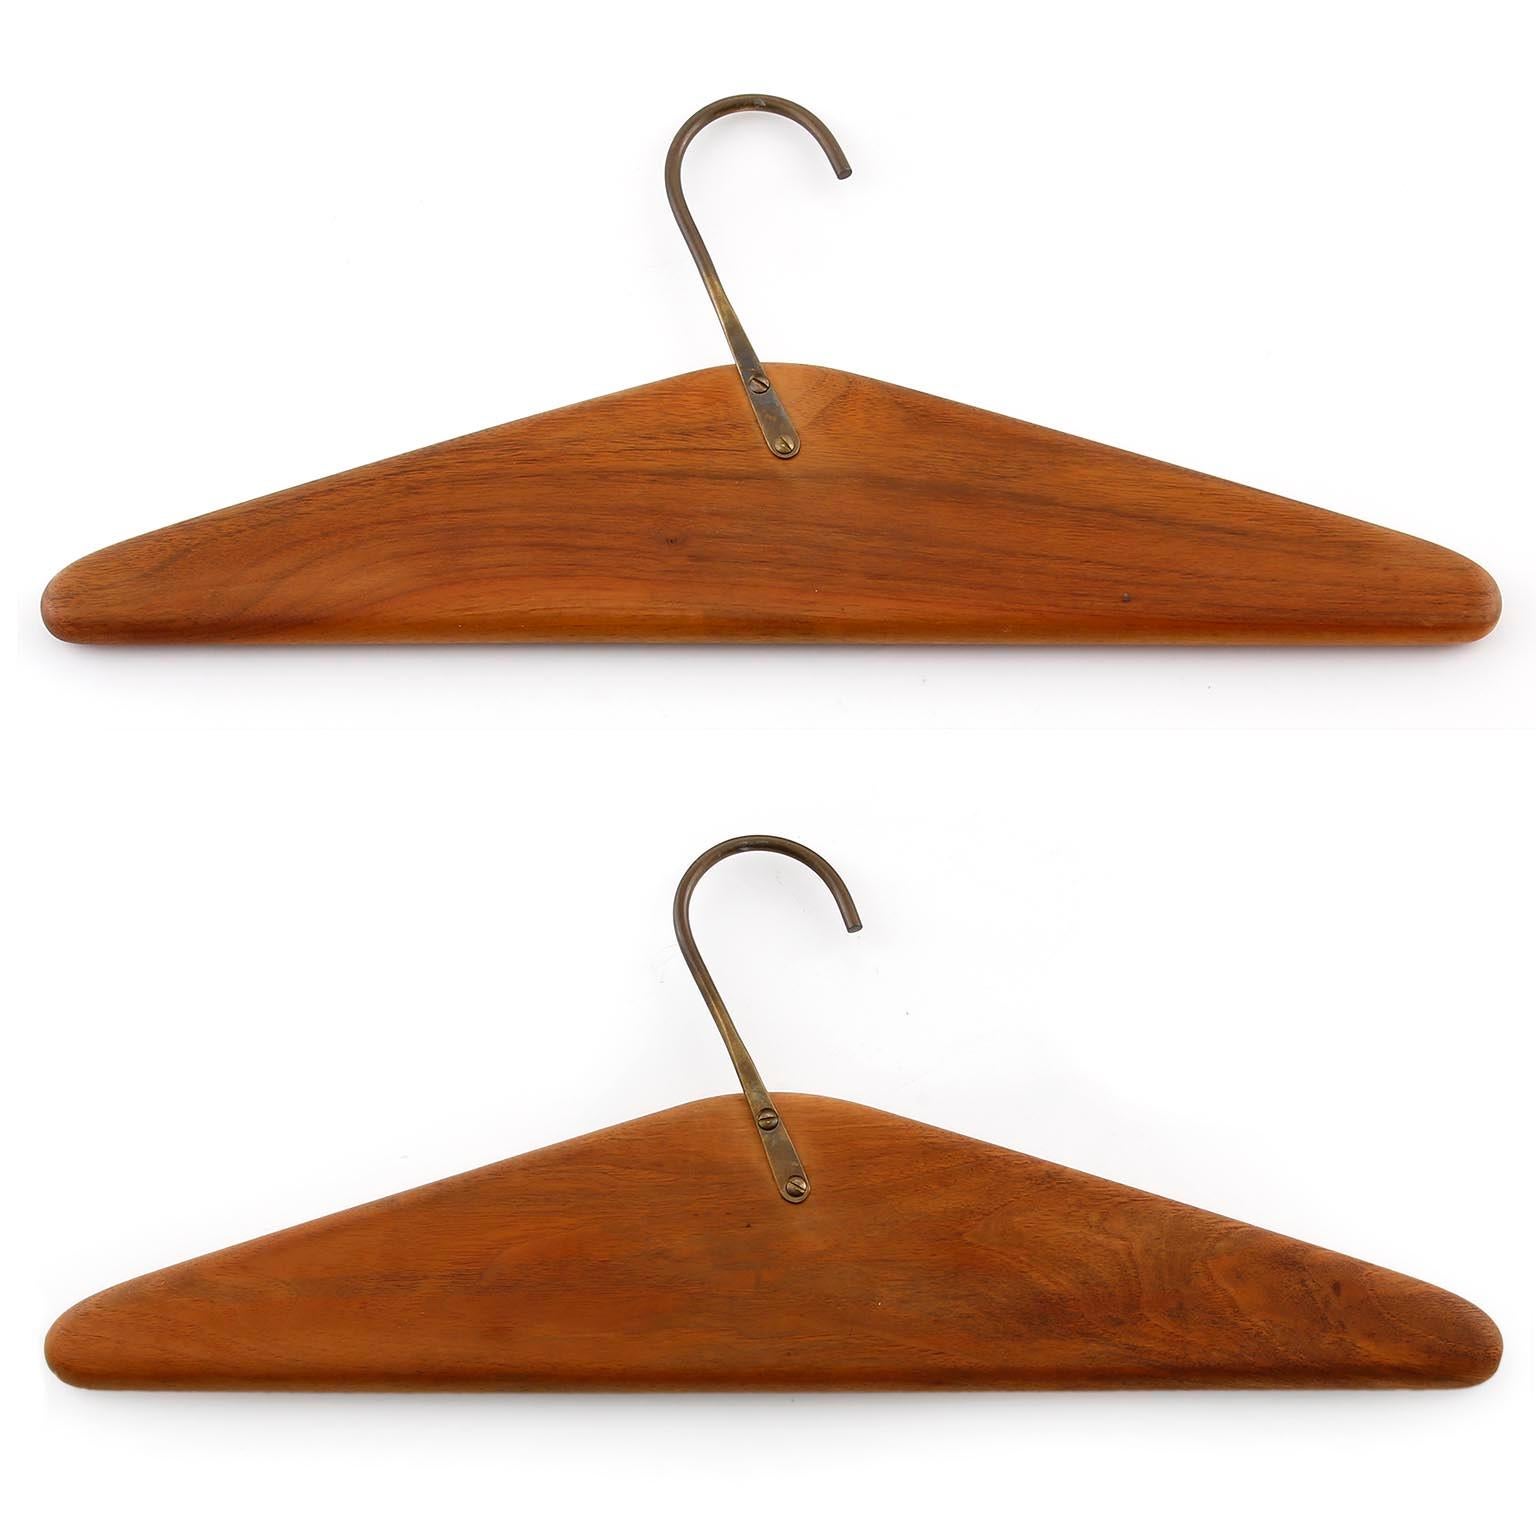 A pair of coat hangers designed by Carl Auböck, manufactured by Carl Auböck workshop in midcentury, Vienna, circa 1960 (late 1950s or early 1960s).
They are made of solid walnut wood and naturally aged brass with lovely patina.
Authentic handmade